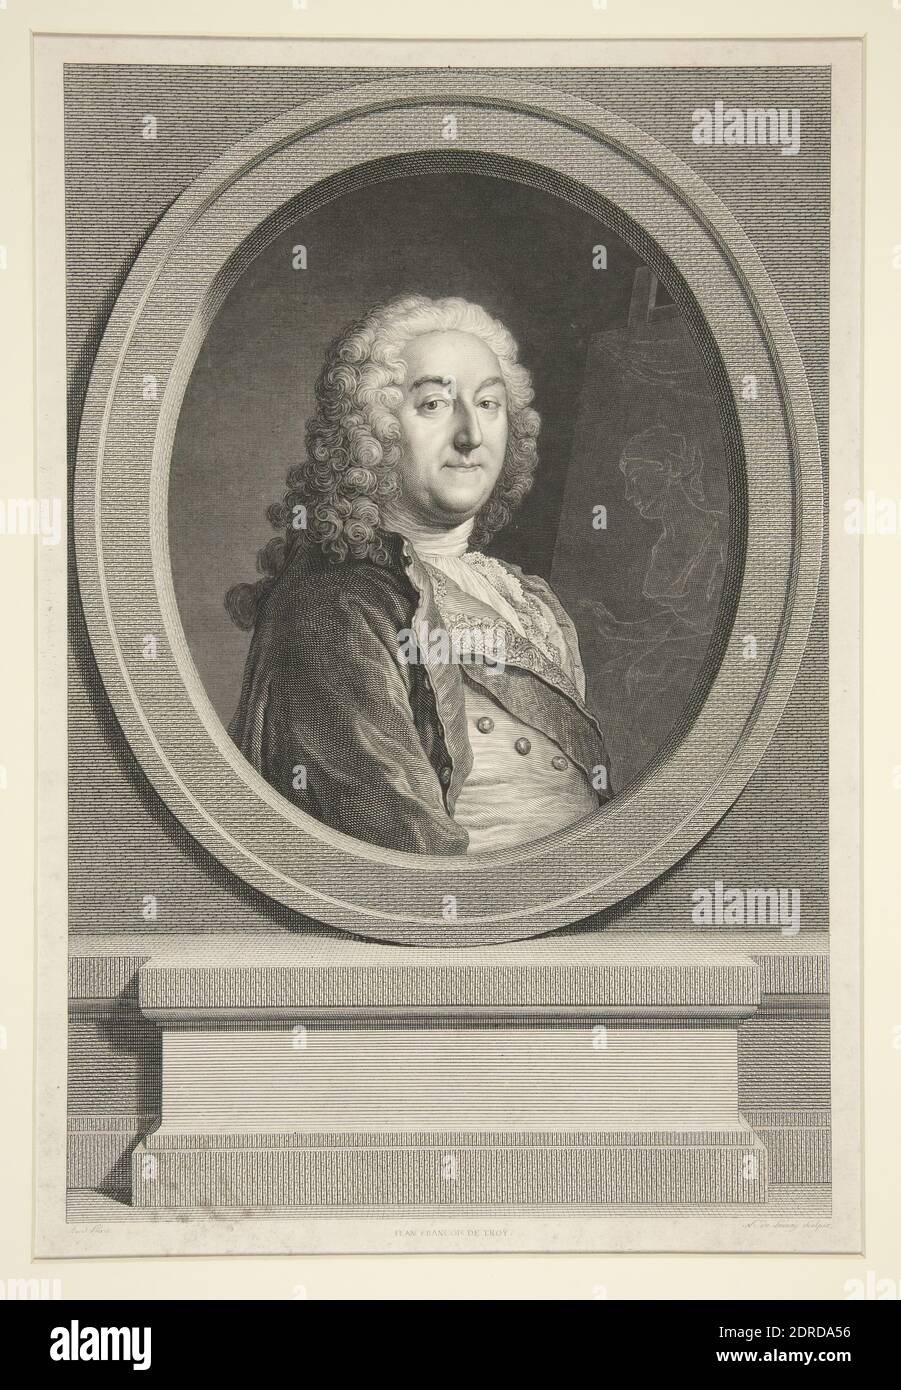 Artist: Nicolas Delaunay, French, 1739–1792, After: Jacques-André-Joseph Aved, French, 1702–1766, Portrait of Jean-François de Troy, Engraving, platemark: 37.5 × 25.4 cm (14 3/4 × 10in.); Sheet: 42.2 × 32.2 cm (16 5/8 × 12 11/16in.), Made in France, French, 18th century, Works on Paper - Prints Stock Photo